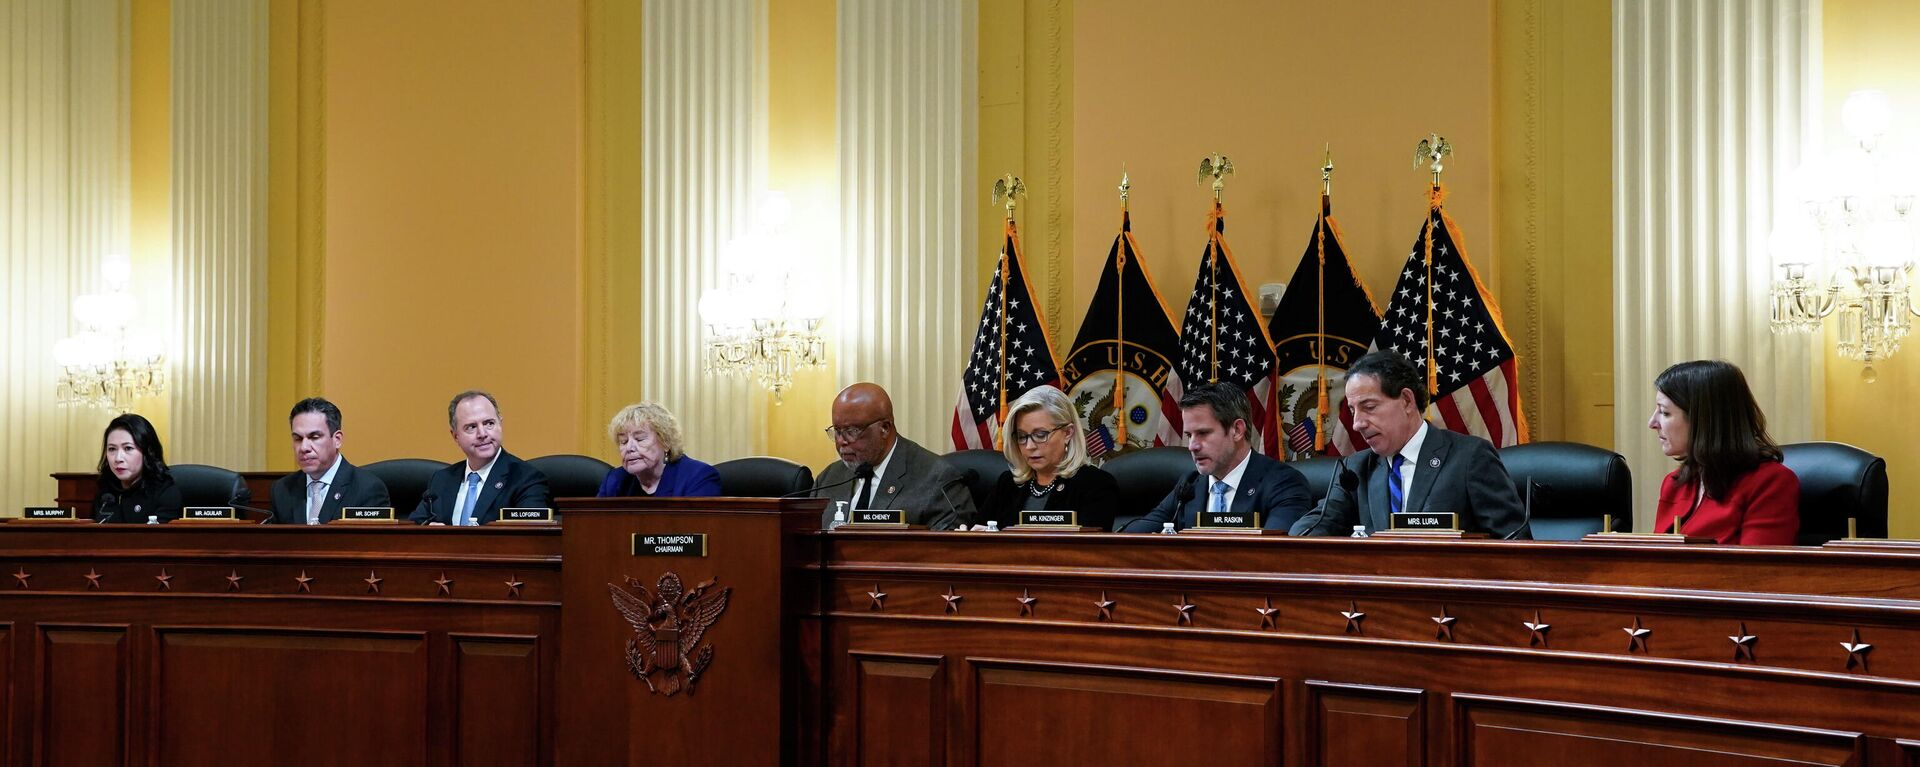 The U.S. House Select Committee to Investigate the January 6th Attack on the U.S. Capitol votes to approve a report recommending the U.S. House of Representatives cite Jeffrey Clark for criminal contempt of Congress during a meeting on Capitol Hill in Washington, U.S. December 1, 2021 - Sputnik International, 1920, 25.12.2021